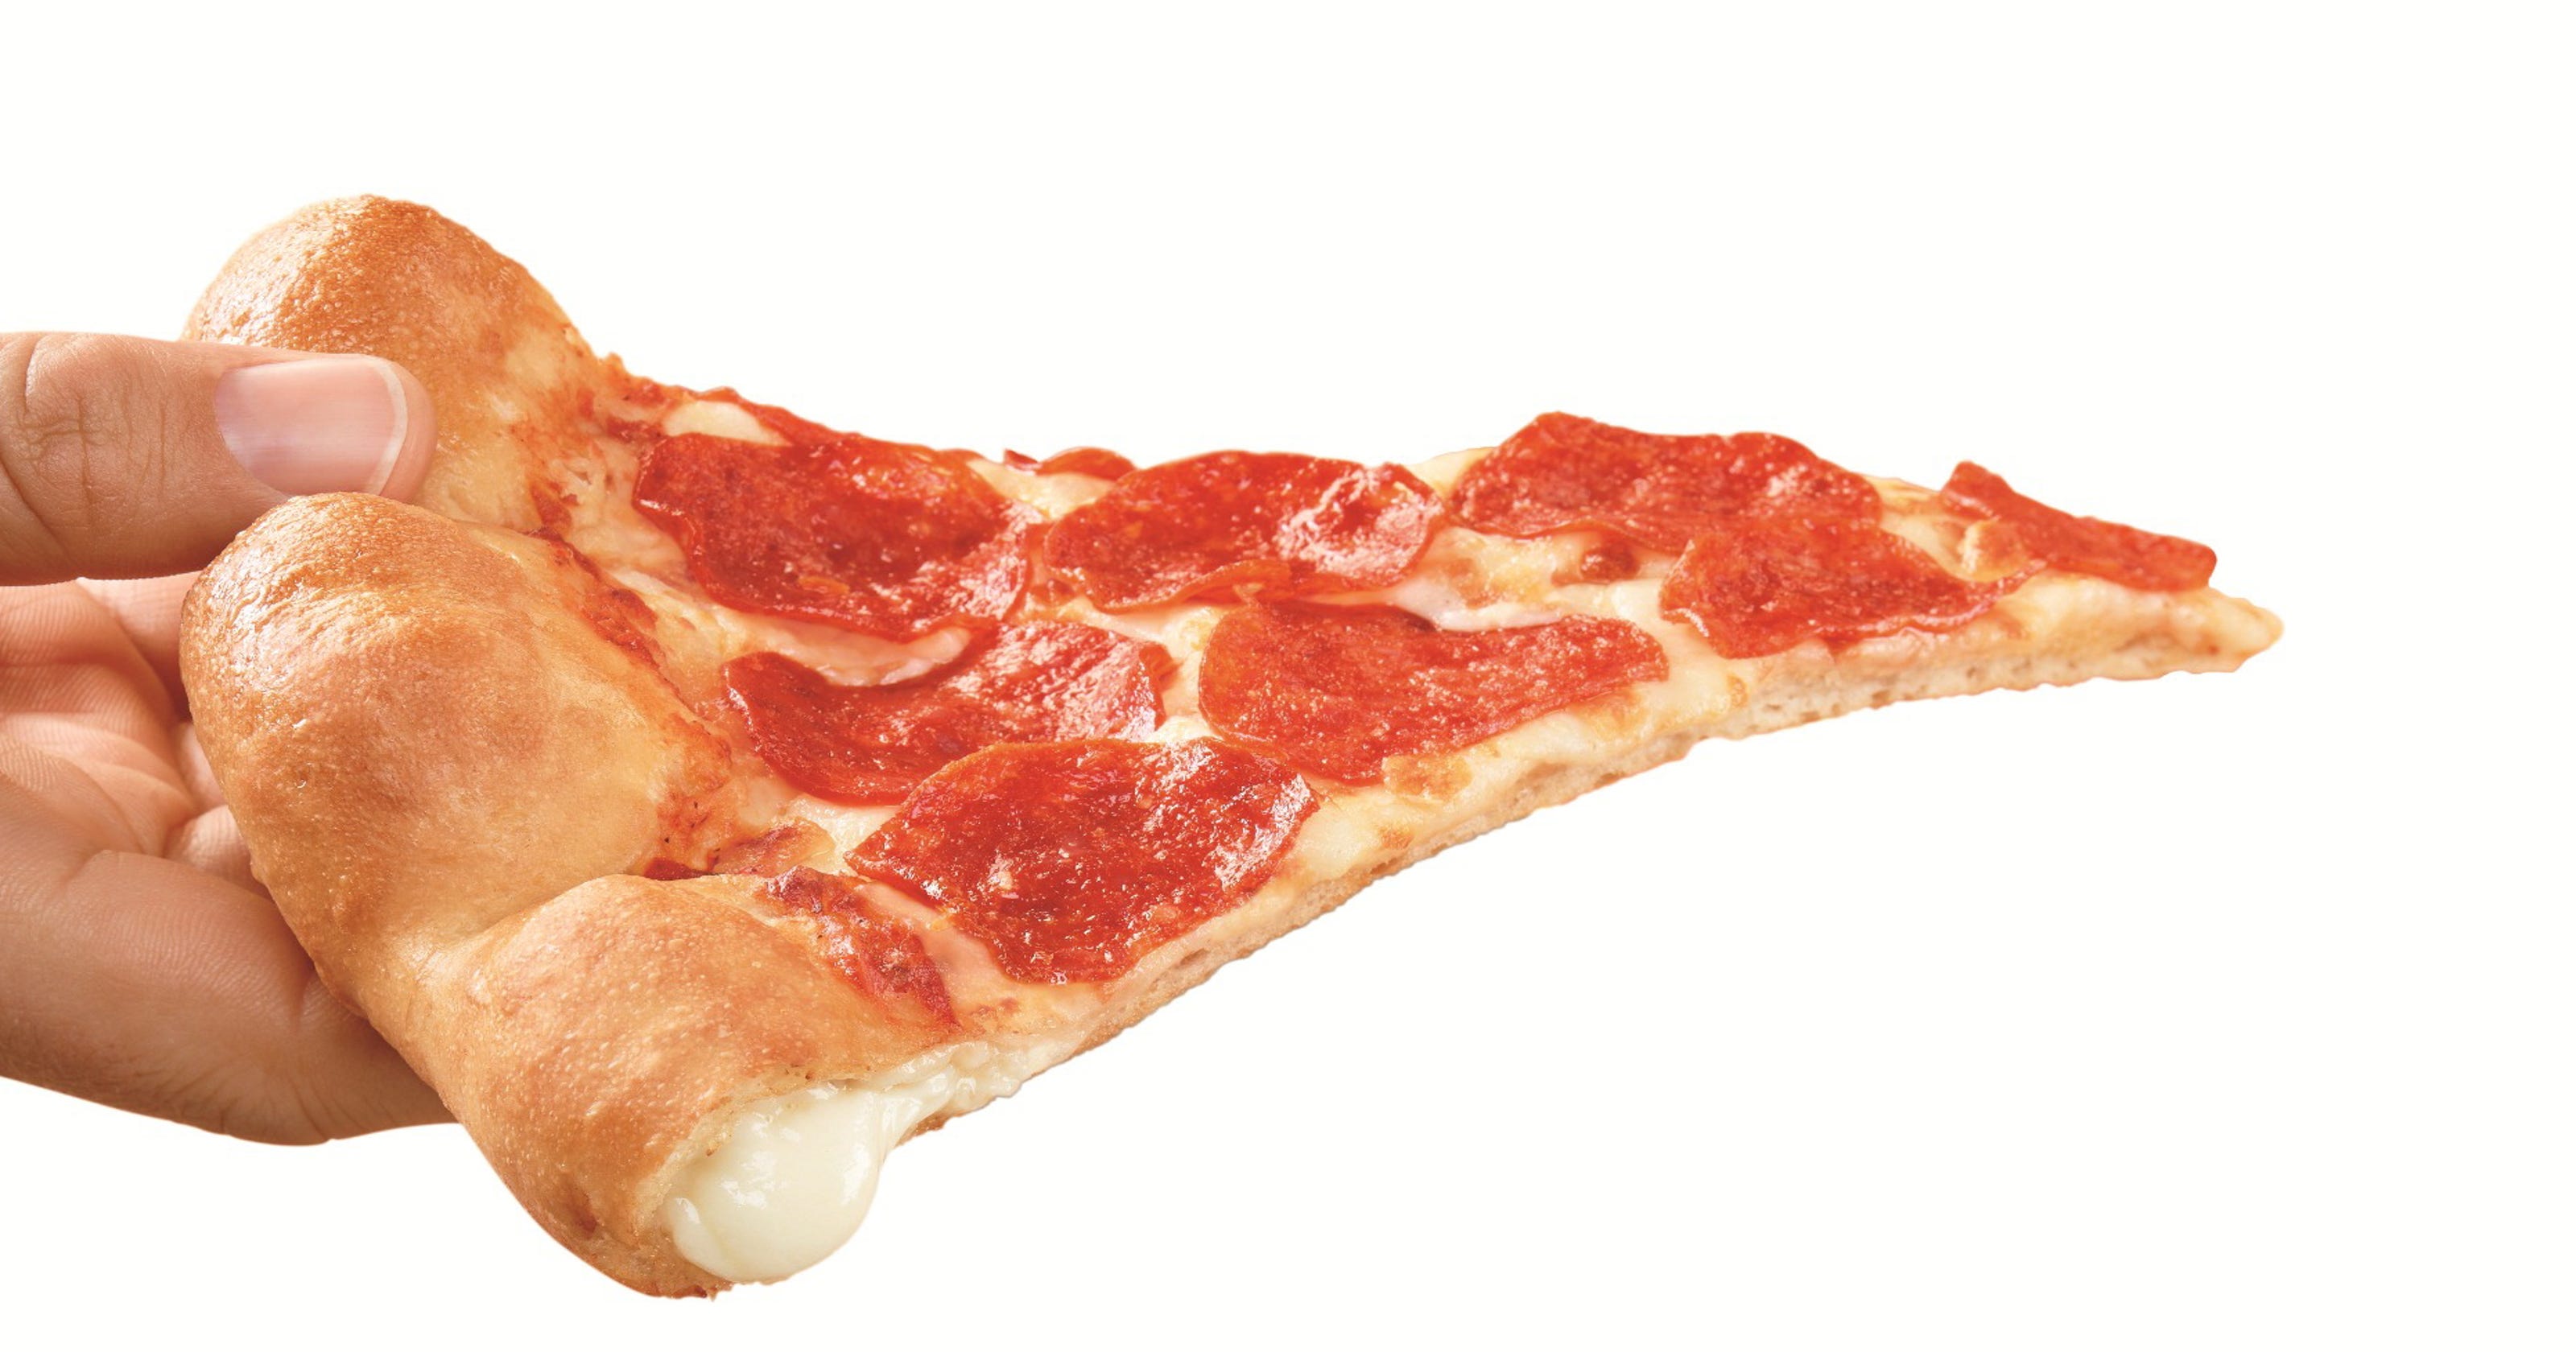 Pizza Hut tests selling 'by the slice'